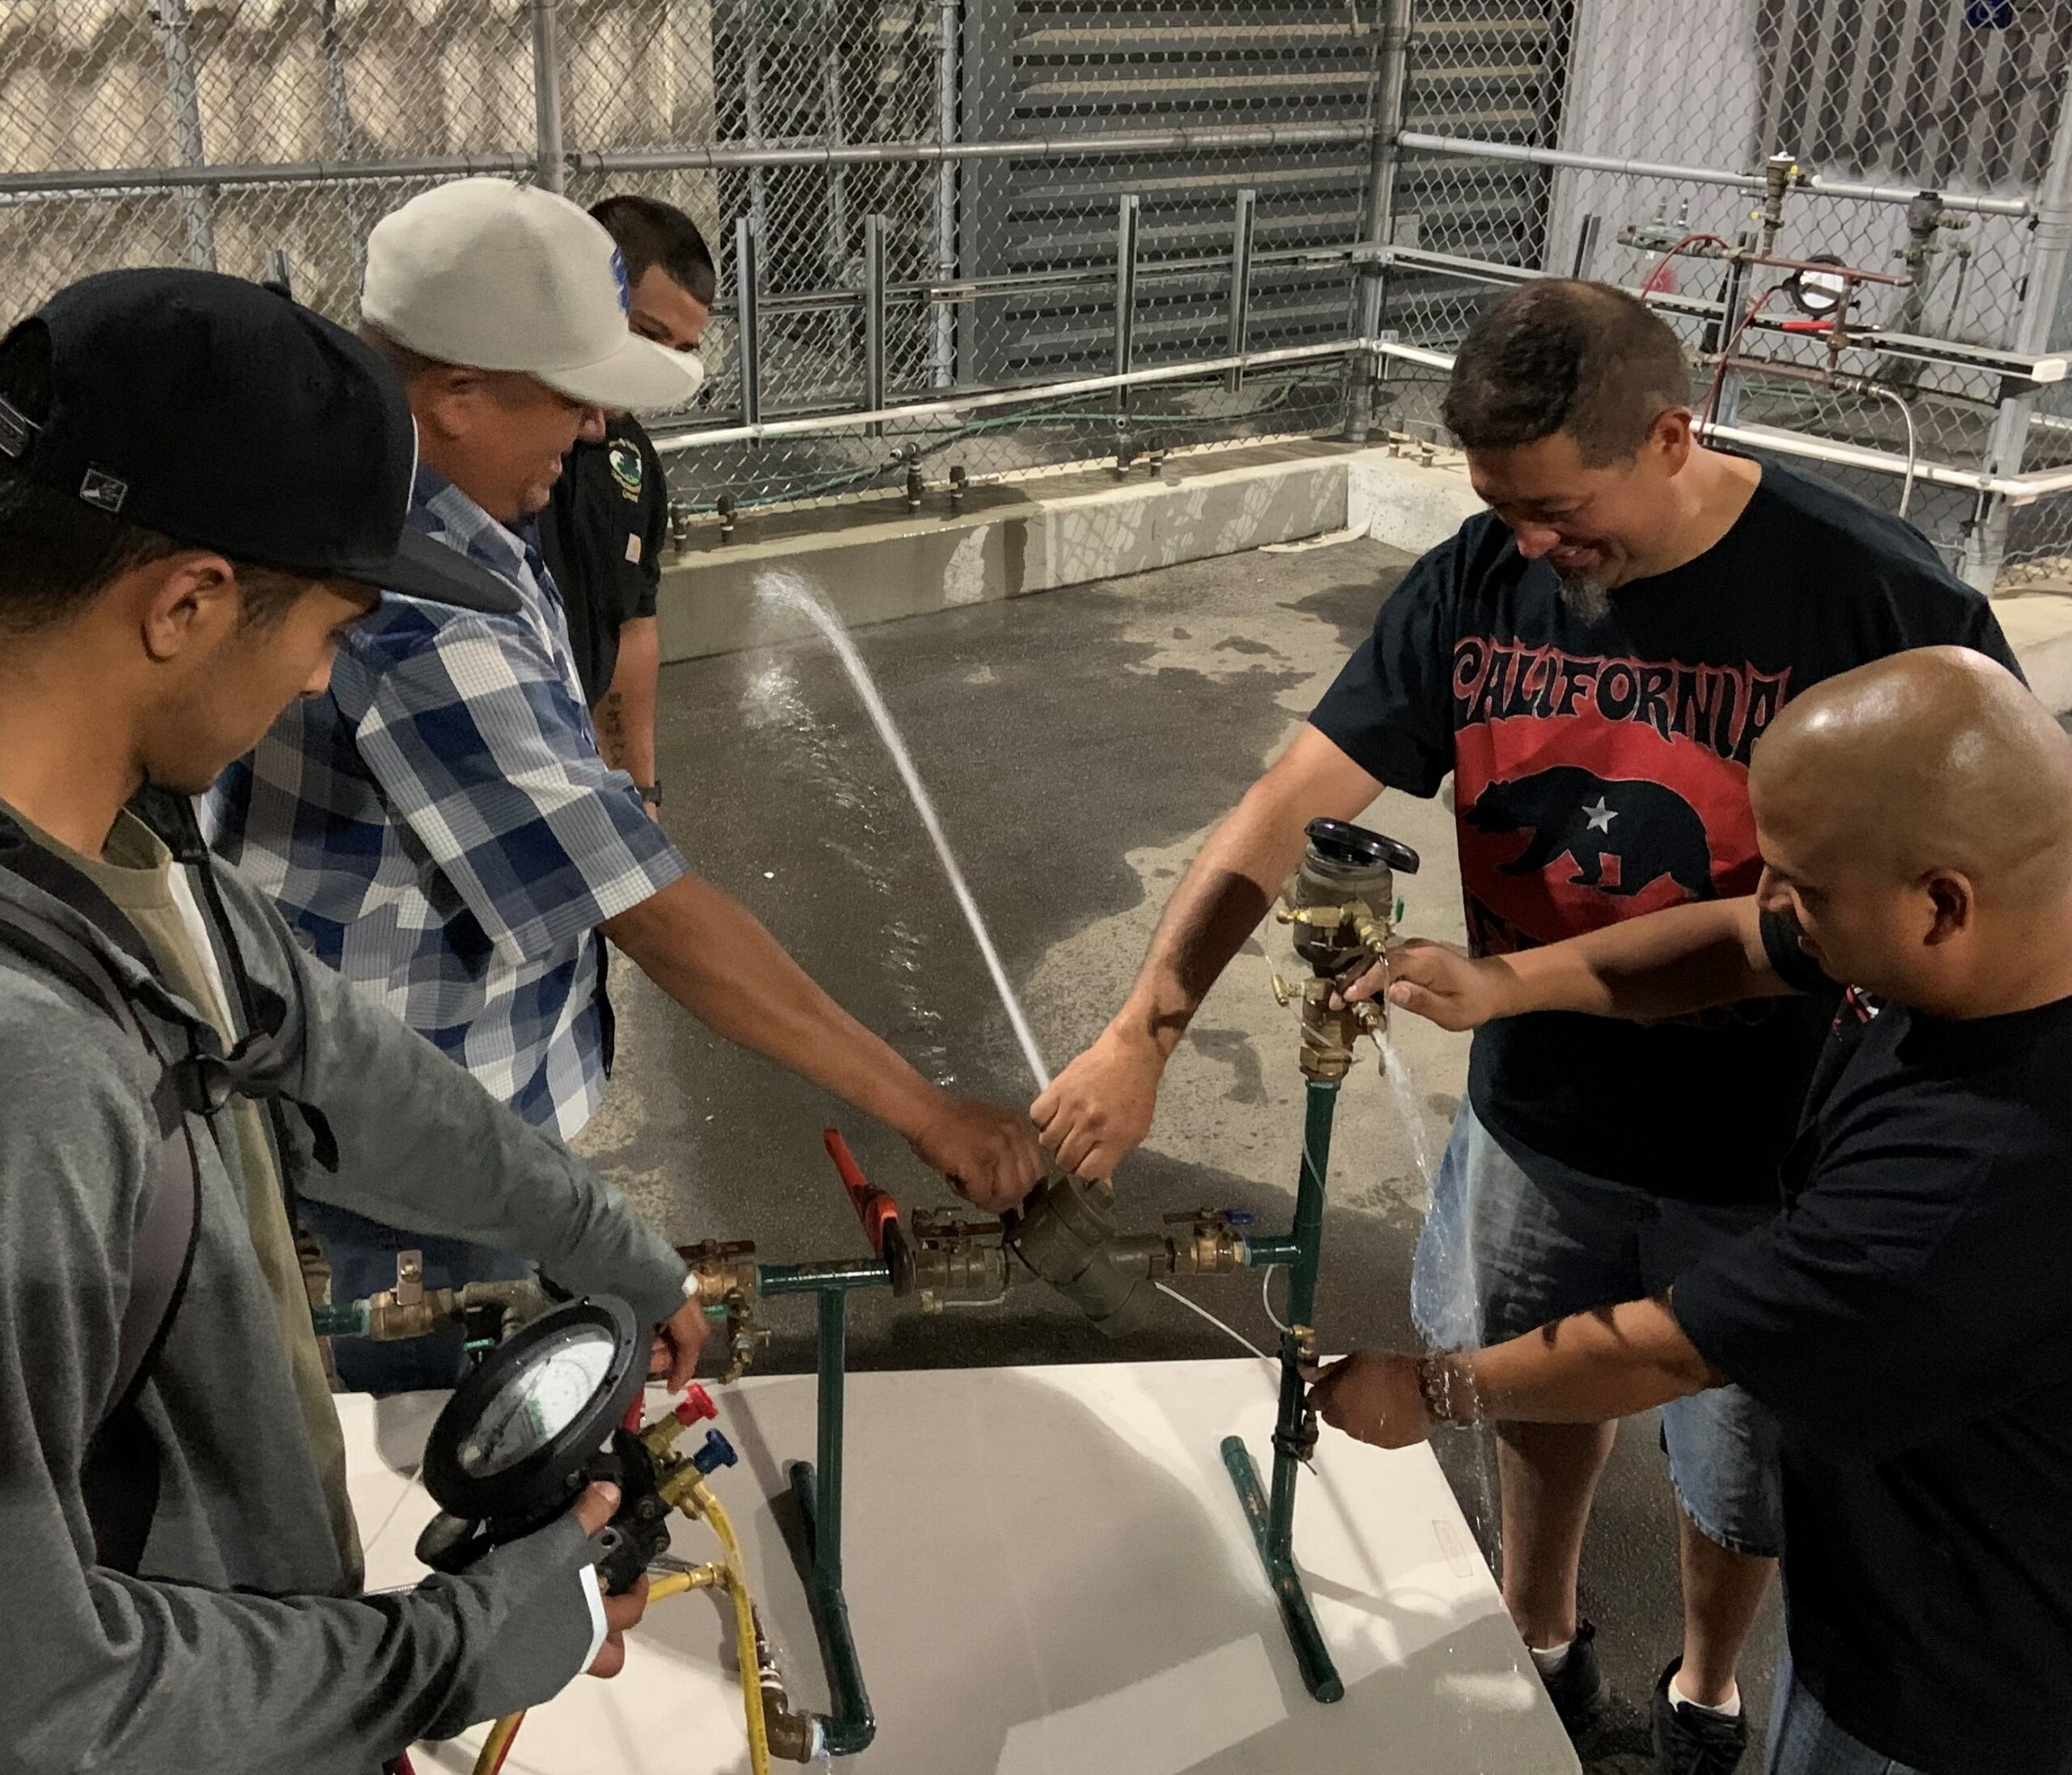 Five men gather around a water backflow device and tests it. The device sprays a strong stream of water at a concrete ledge.